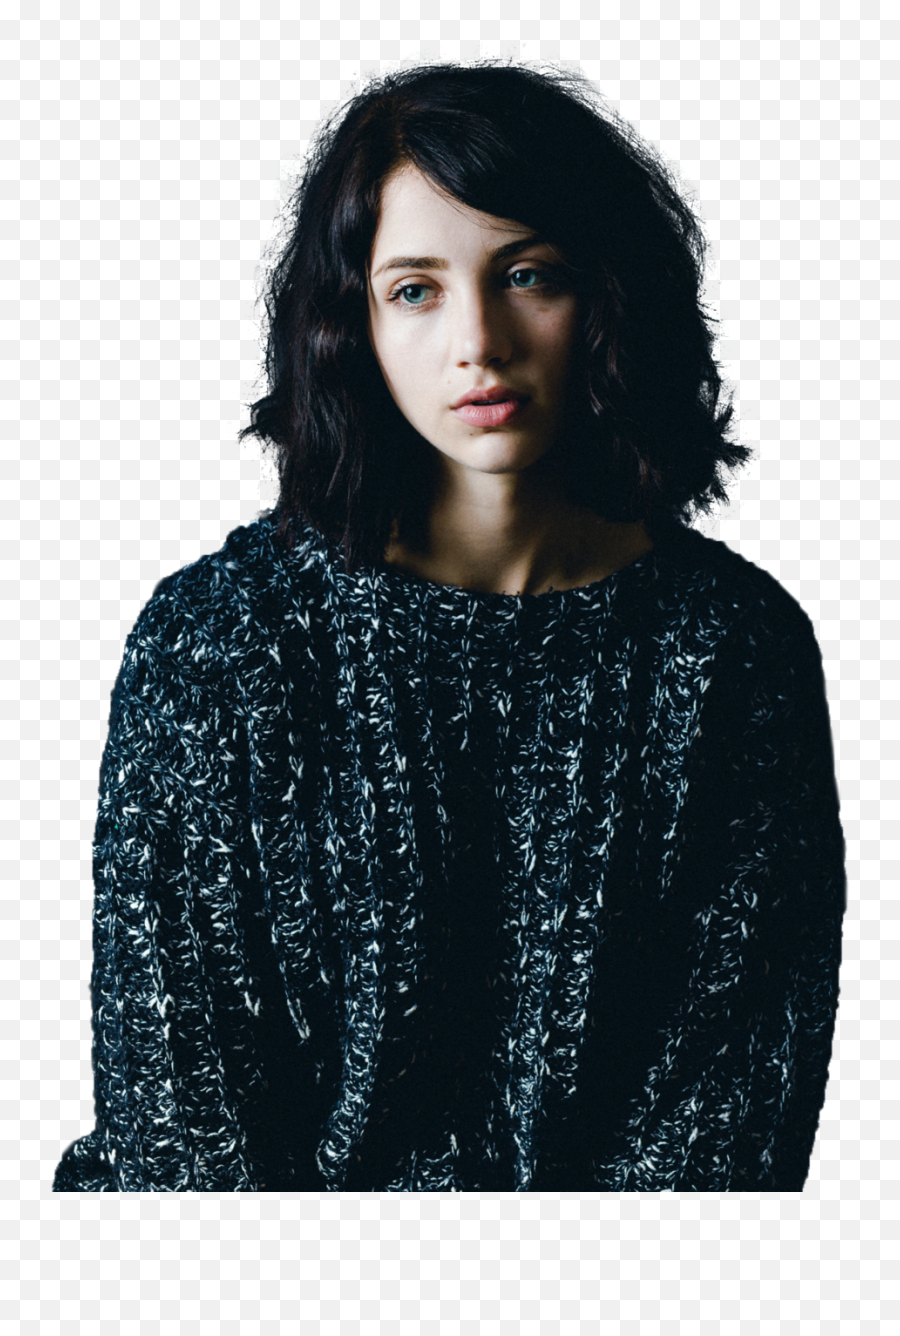 Download Free Png Emily Rudd Photos